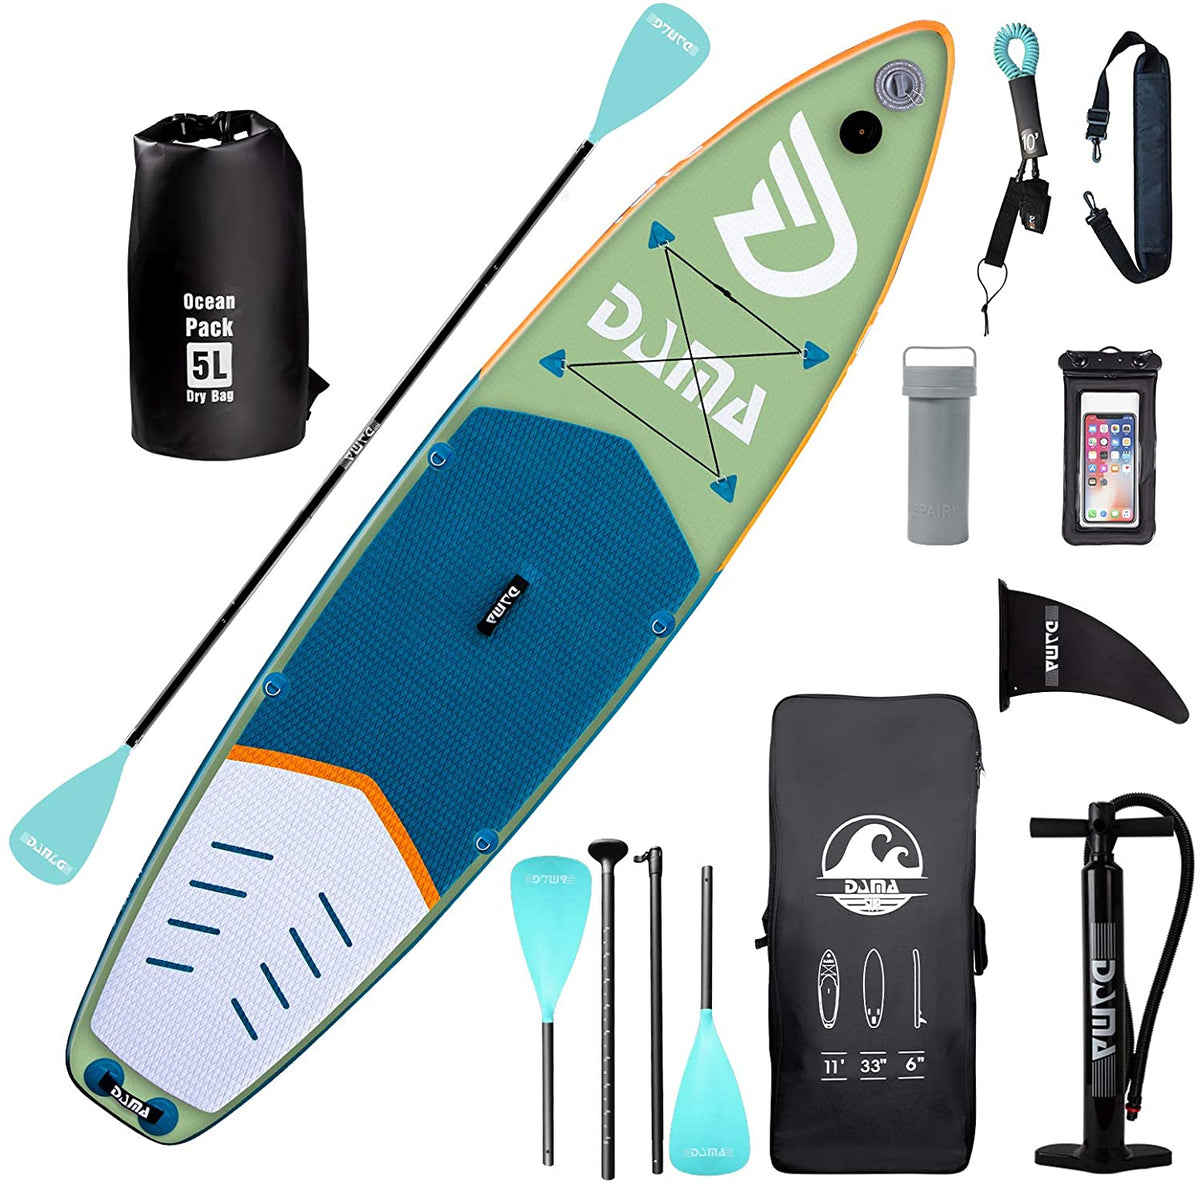 DAMA 10'6x32x6 Premium Inflatable Paddle Board with Durable SUP Acc